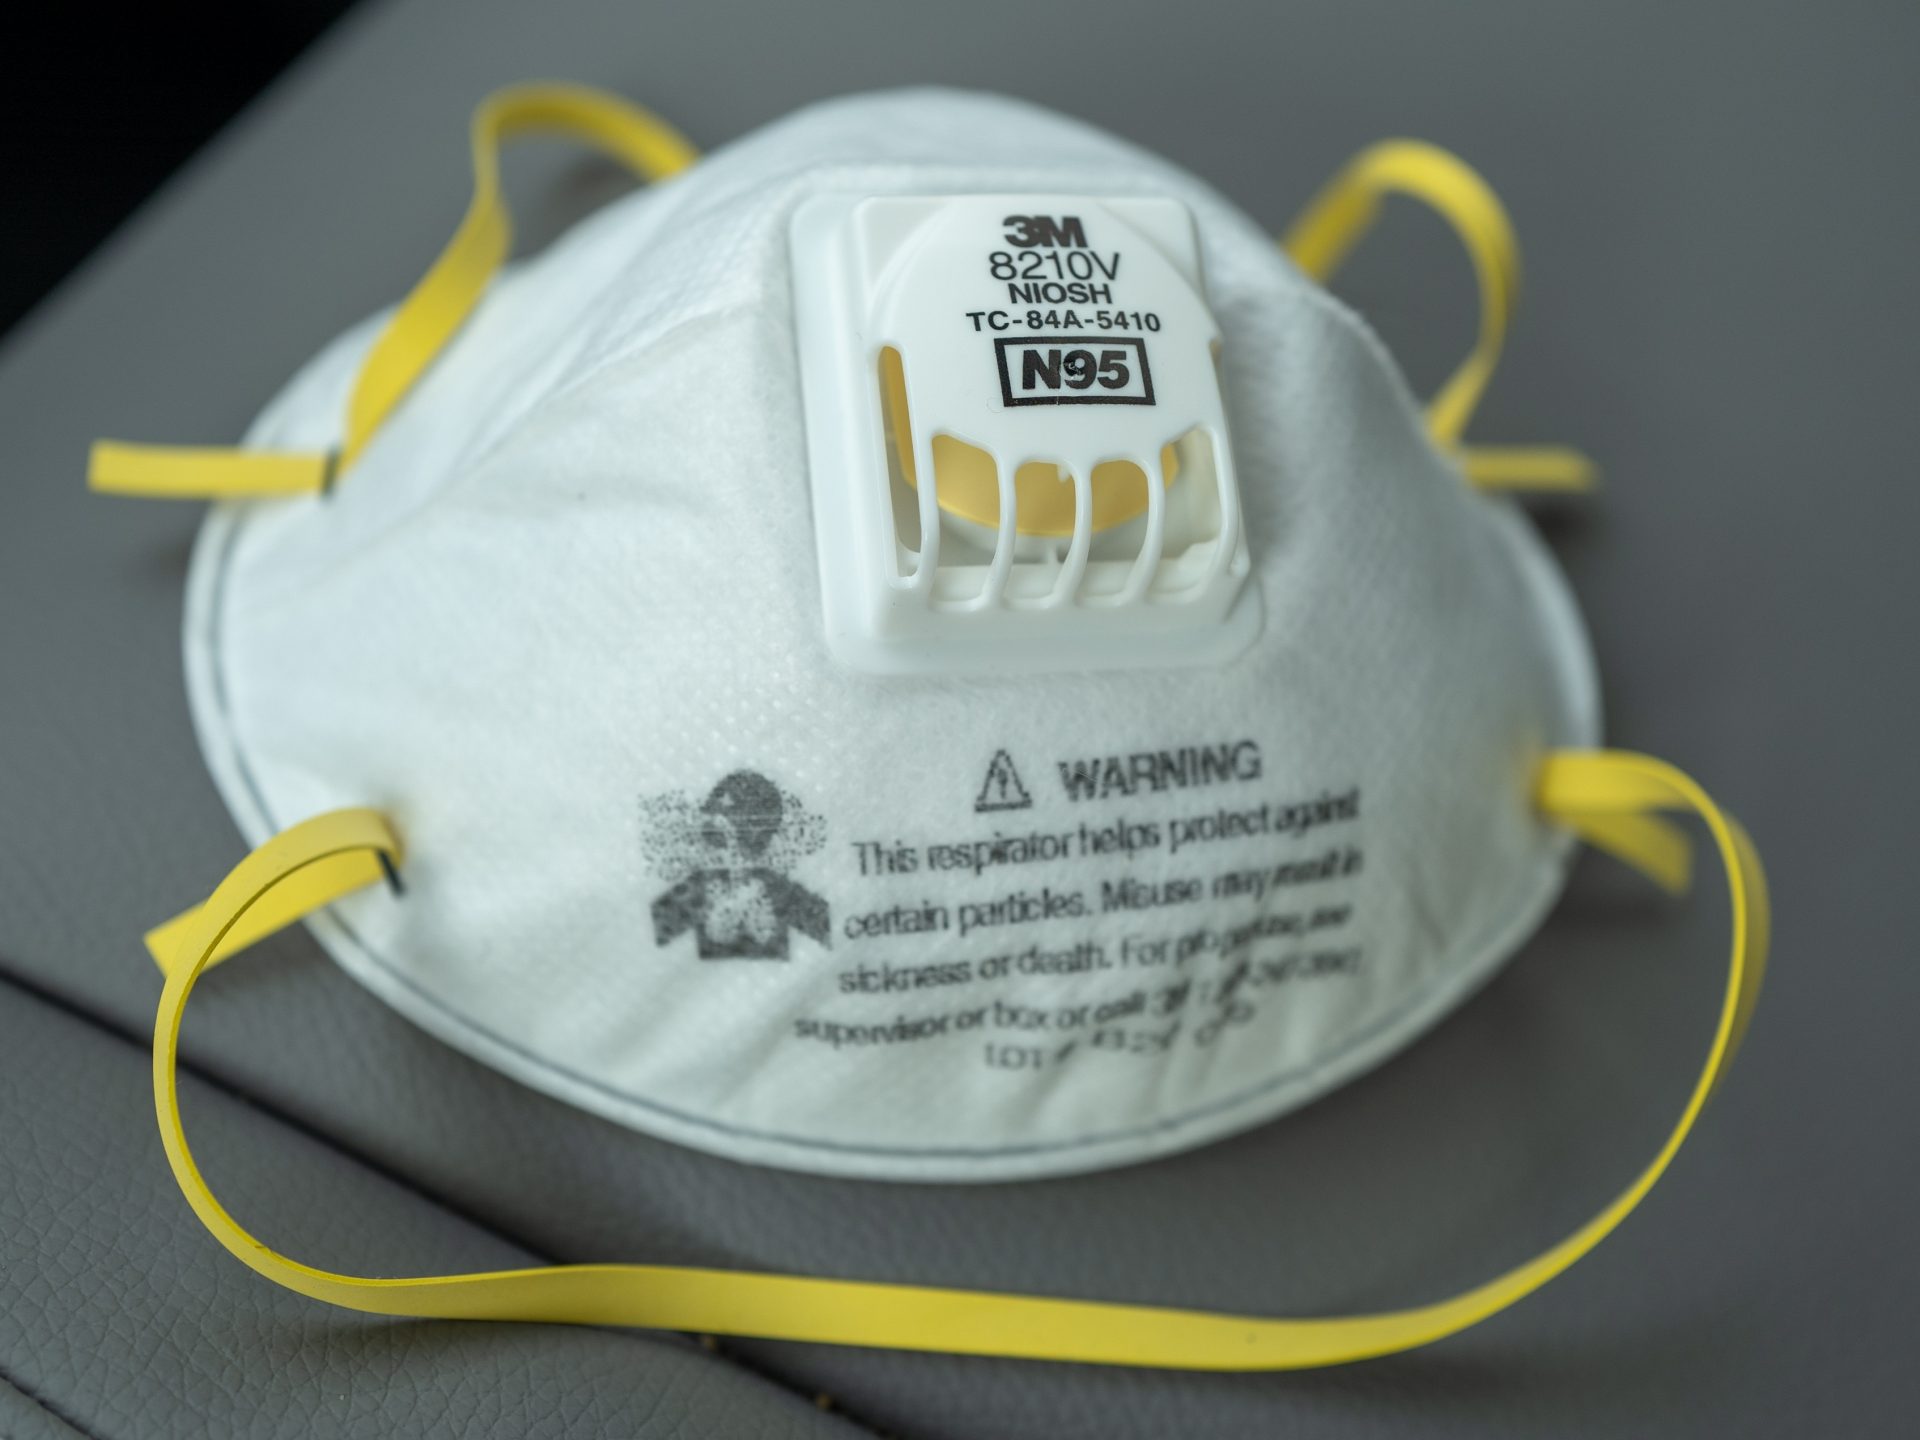 The Trump administration is telling 3M to prioritize the U.S. market for its N95 respirator masks during the global COVID-19 pandemic. The company has been accused of not doing enough to support the U.S. health care system, and fostering price-gouging.